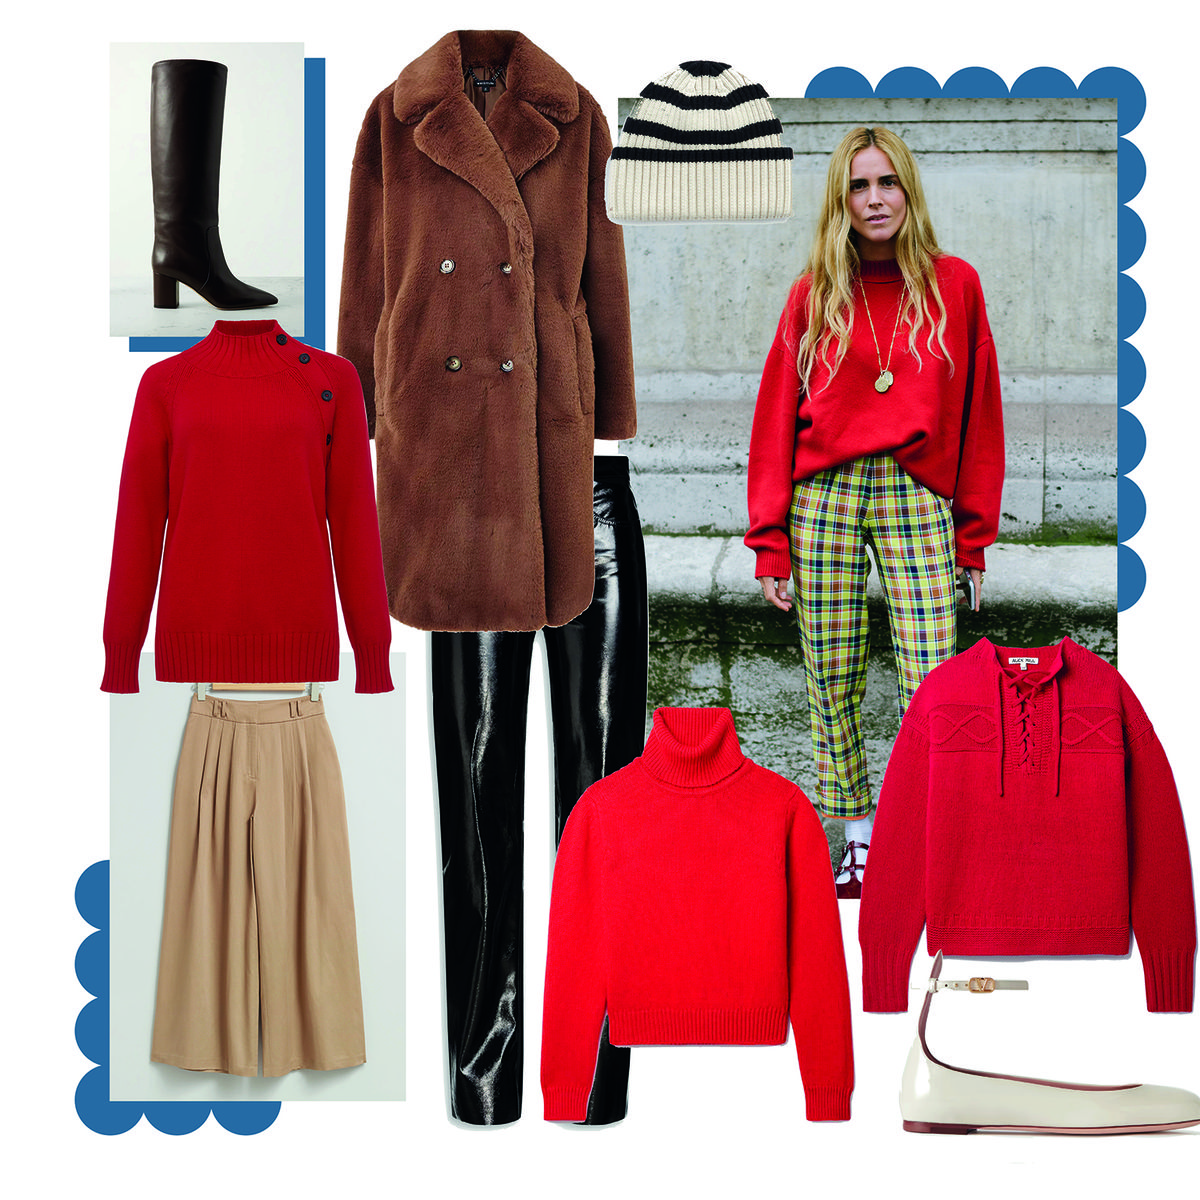 Best red jumper: How to style a red jumper